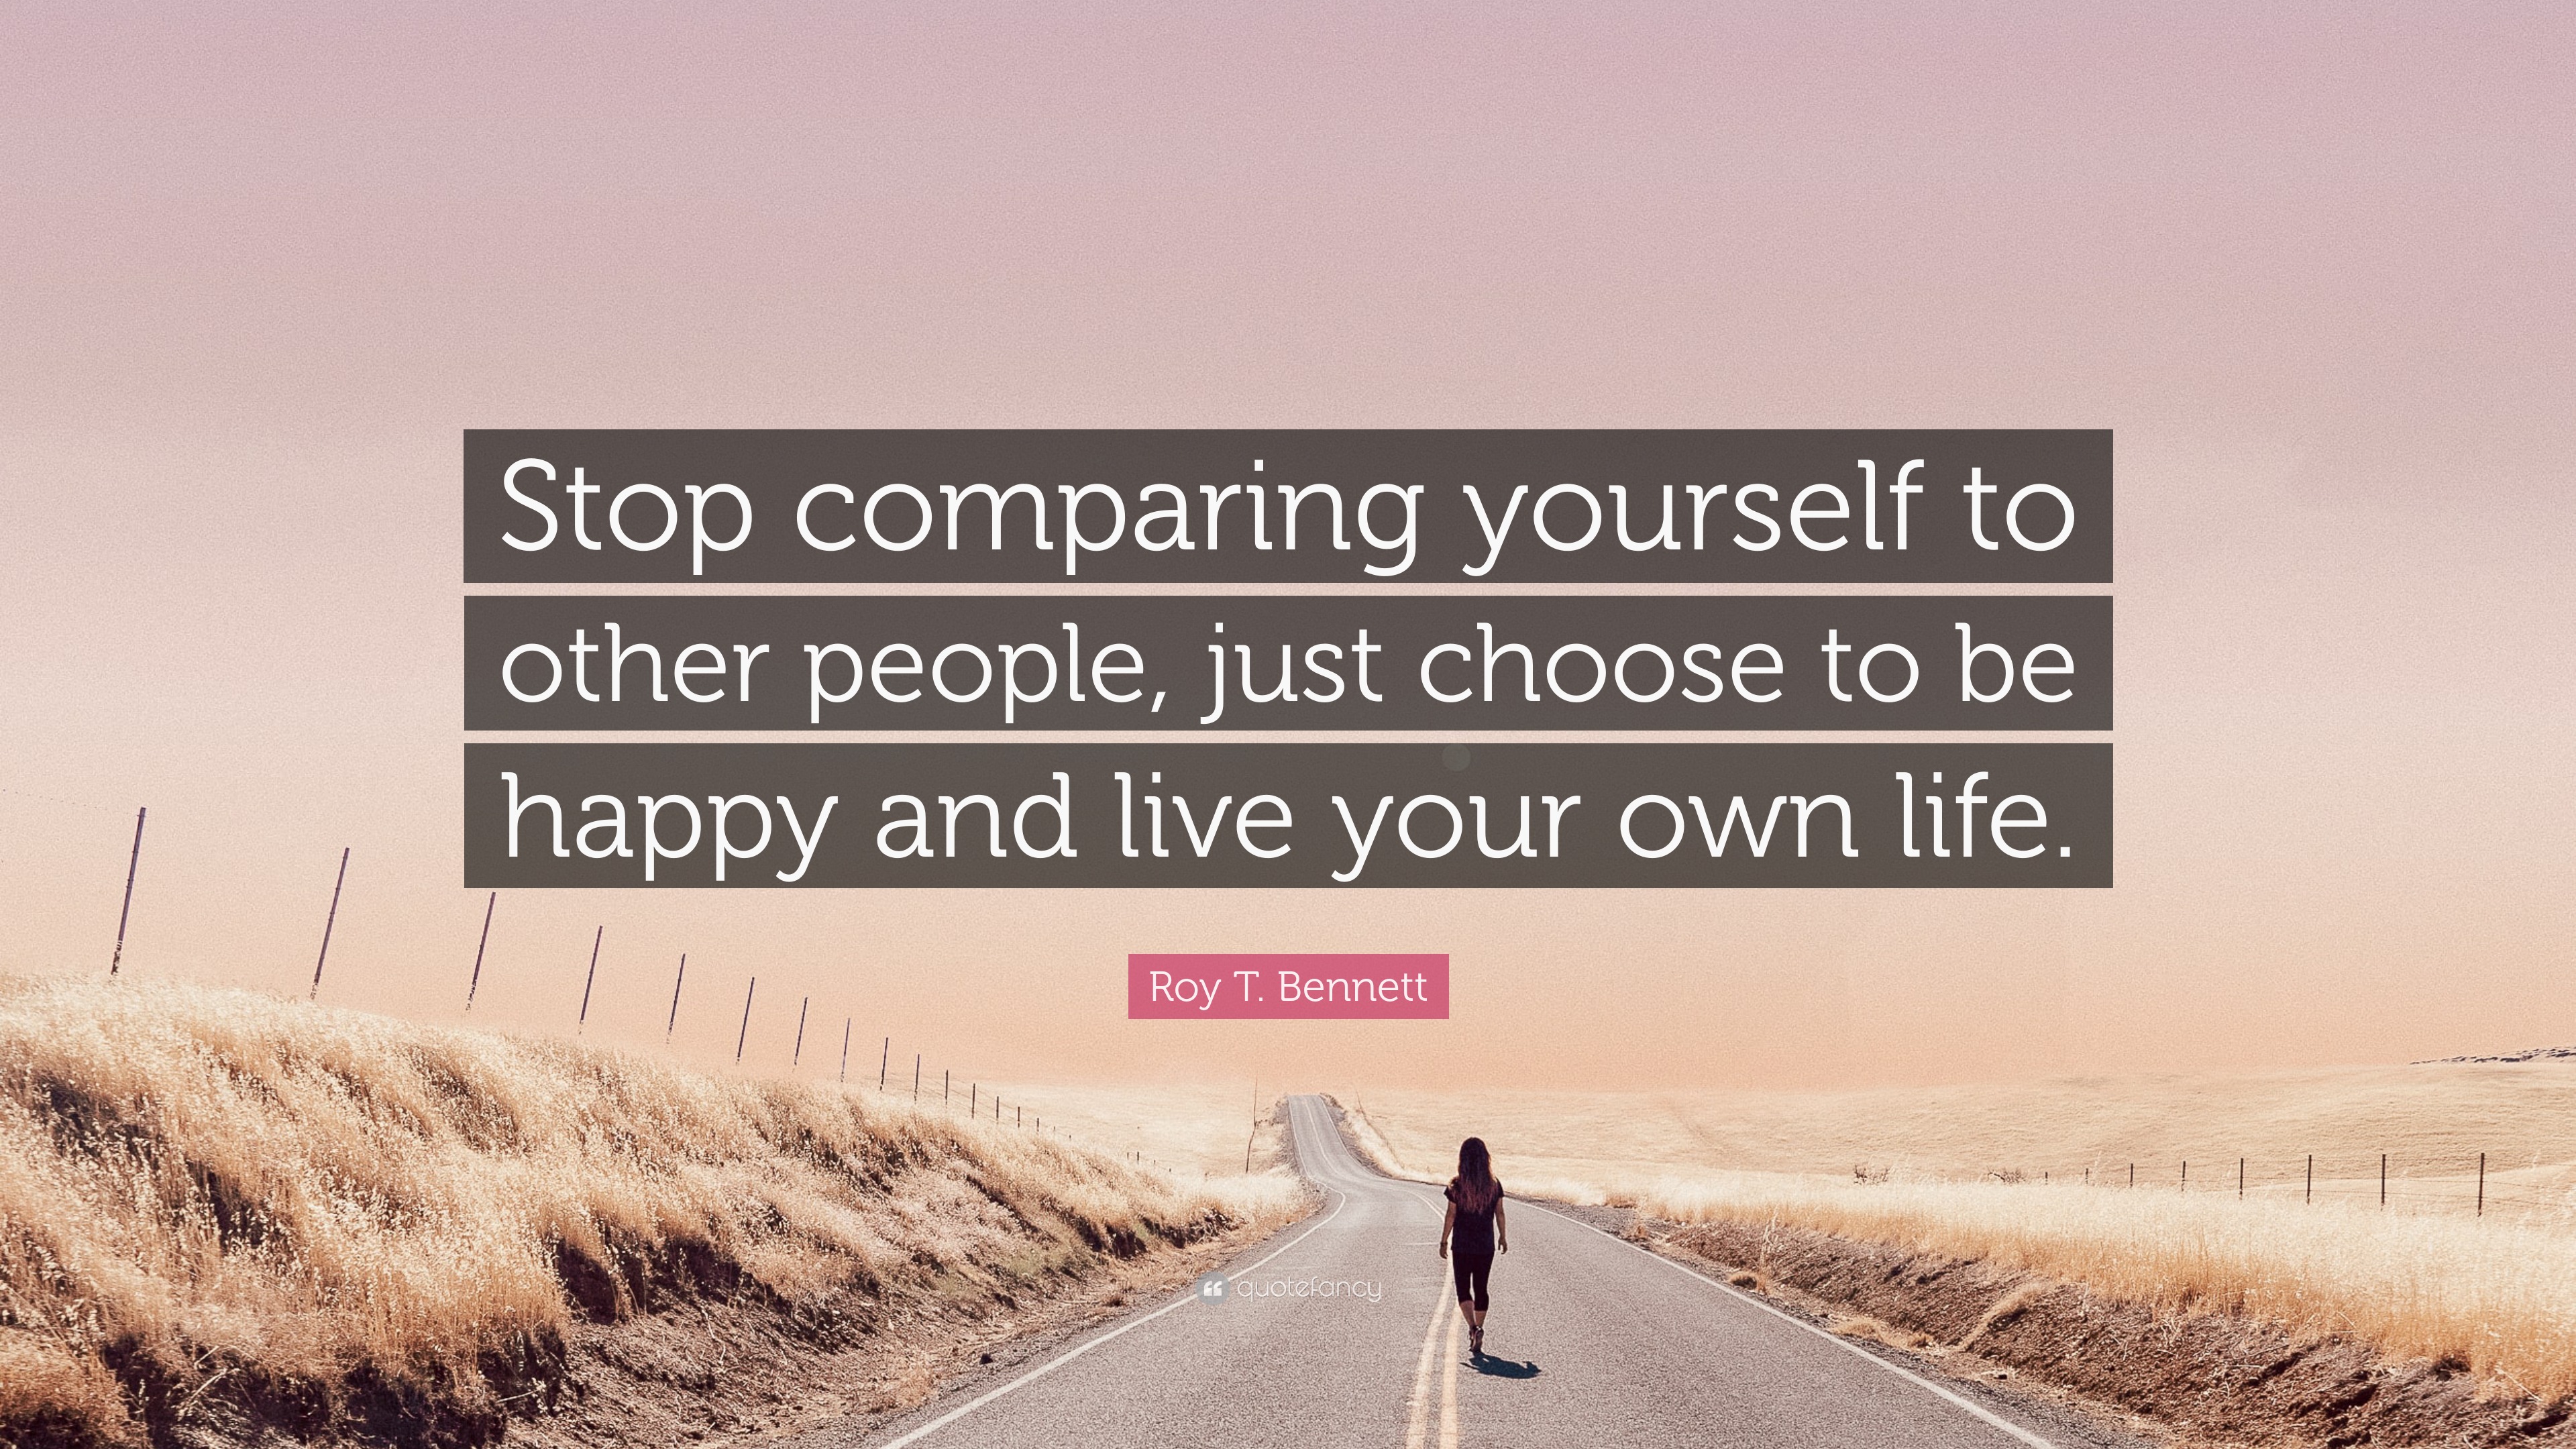 Just Be Yourself - Live Life Happy